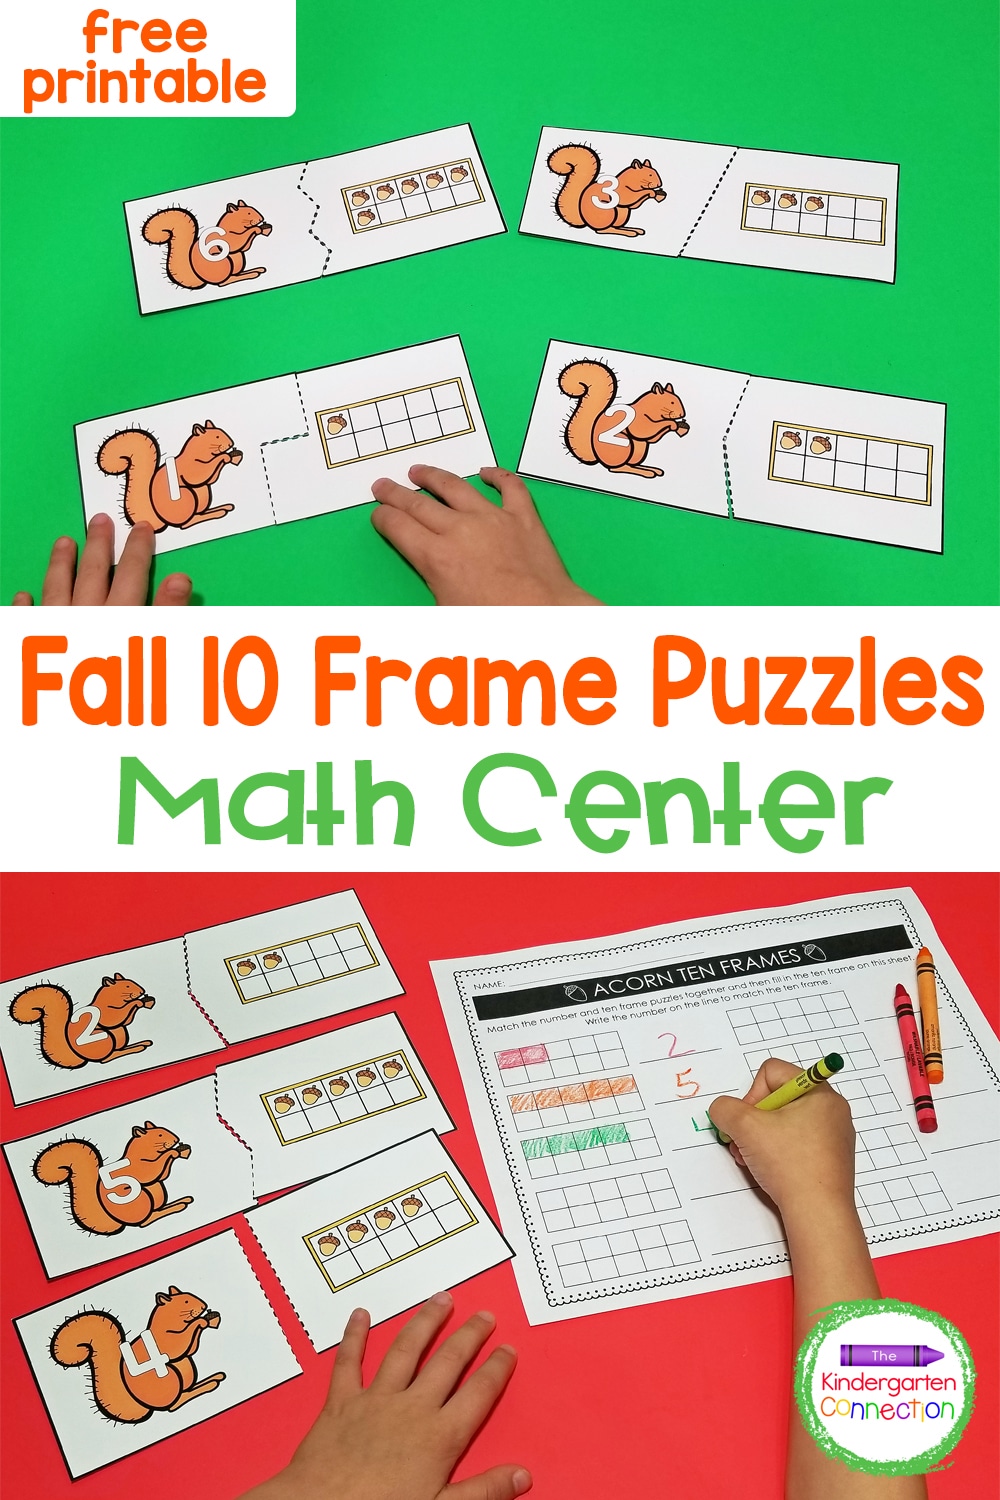 These free printable Acorn 10 Frame math puzzles and recording sheet are perfect for a fall-themed Pre-K or Kindergarten math center activity!